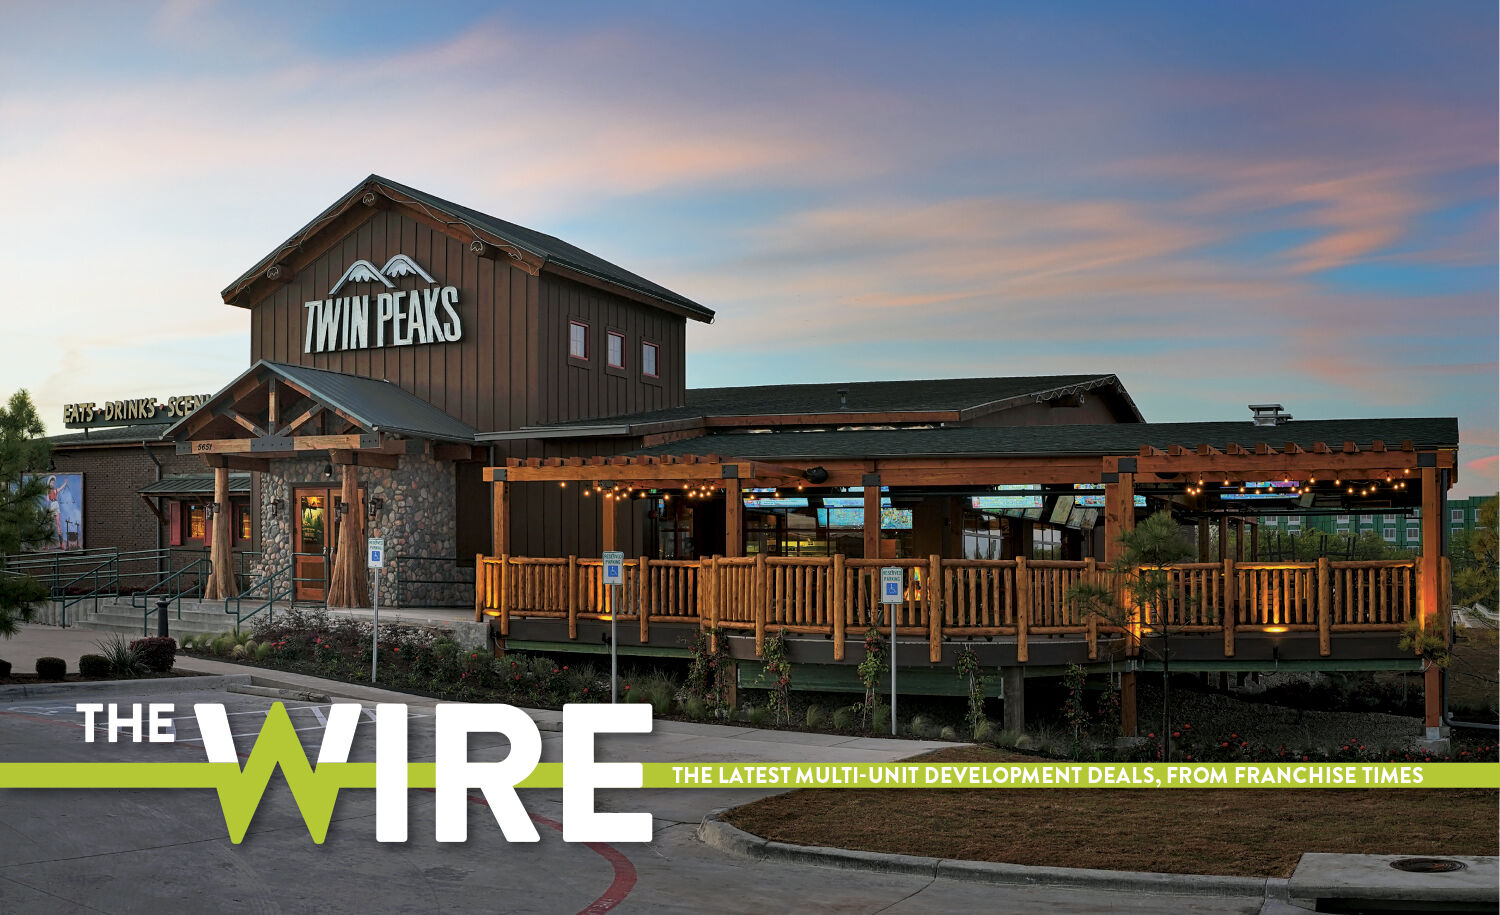 Multi-brand Franchisee Falcons Group Expands Twin Peaks in 